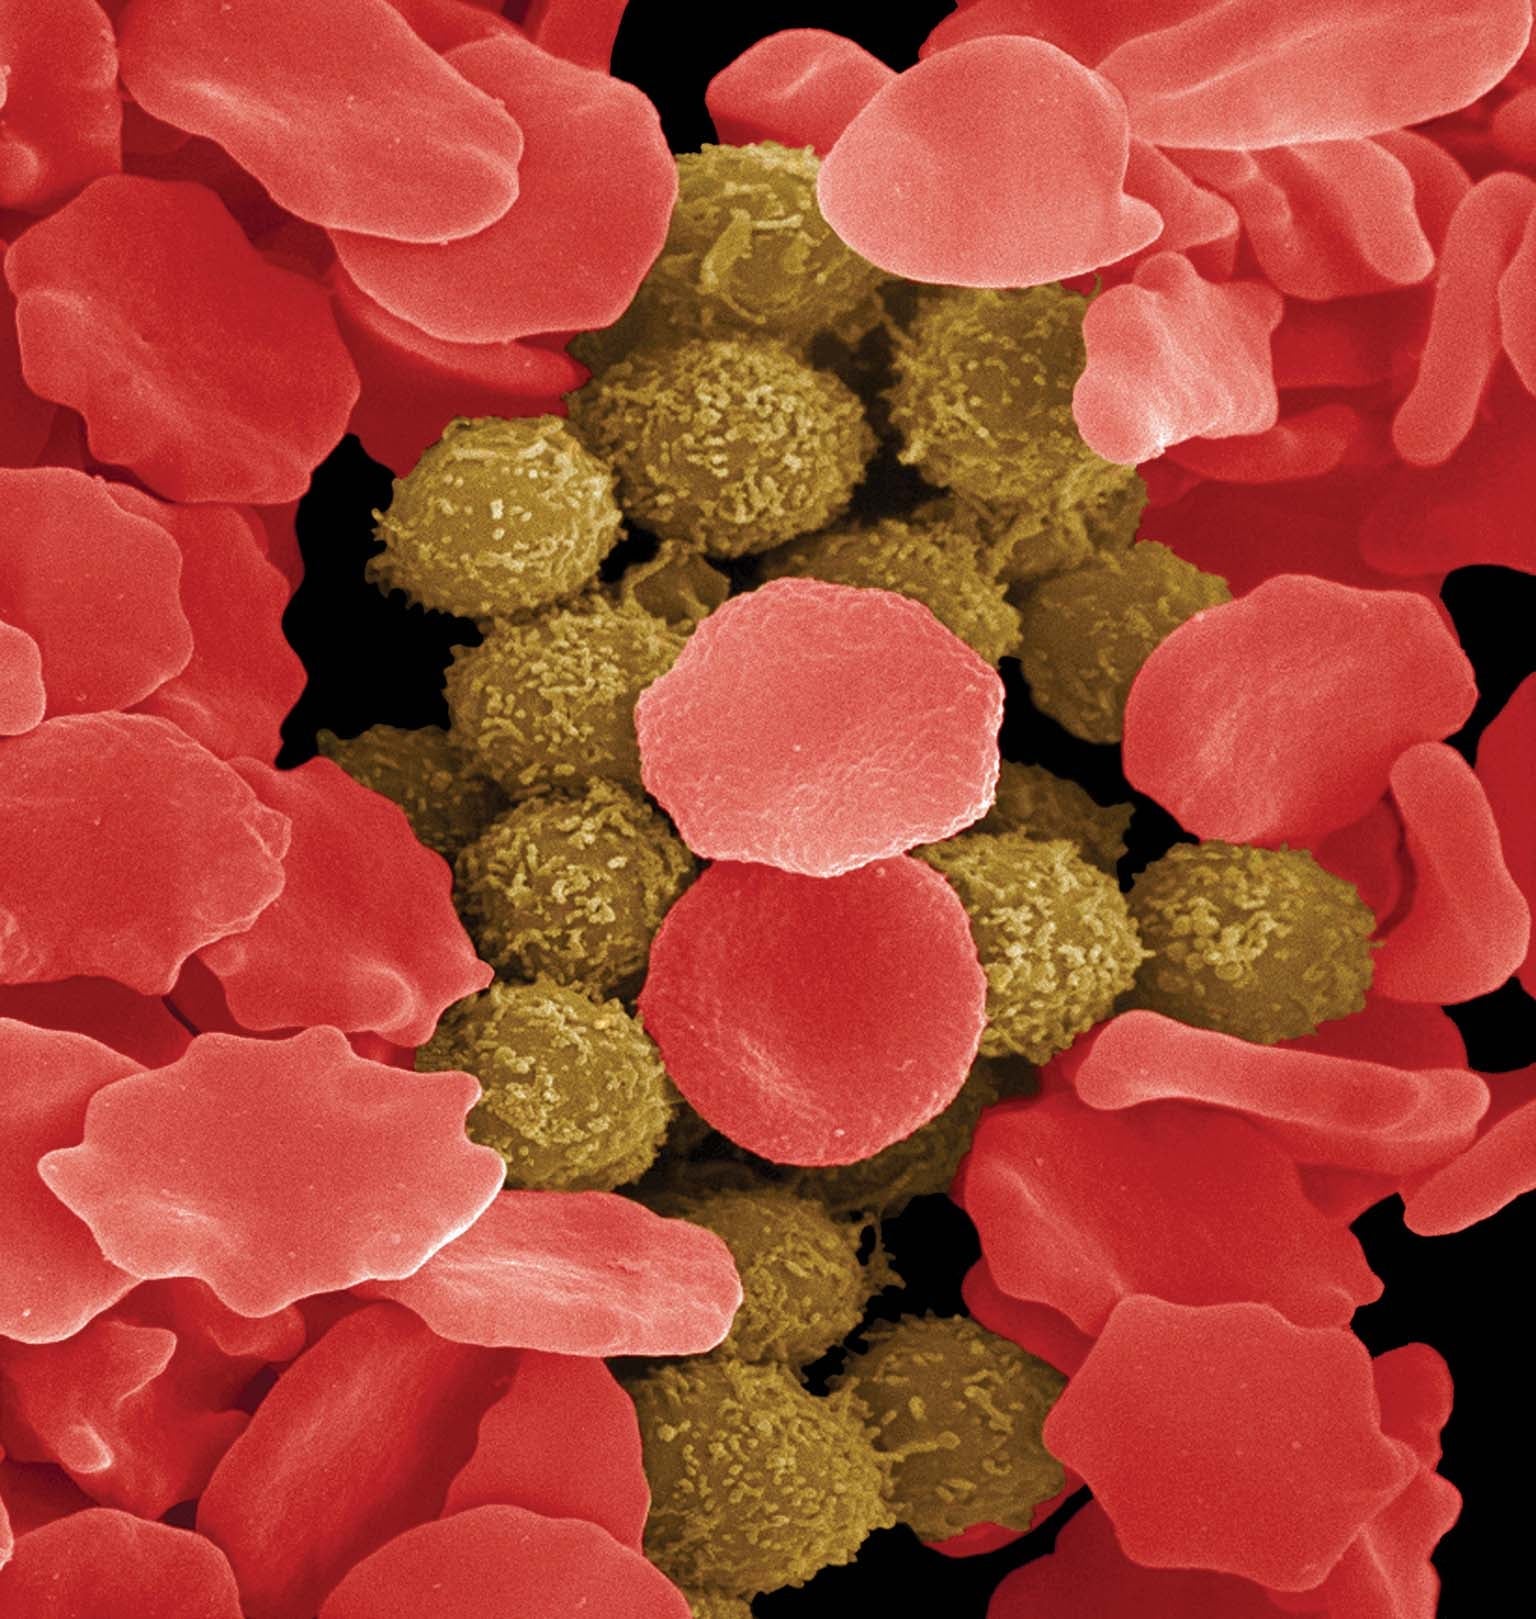 Red and white blood cells from a leukemia patient.